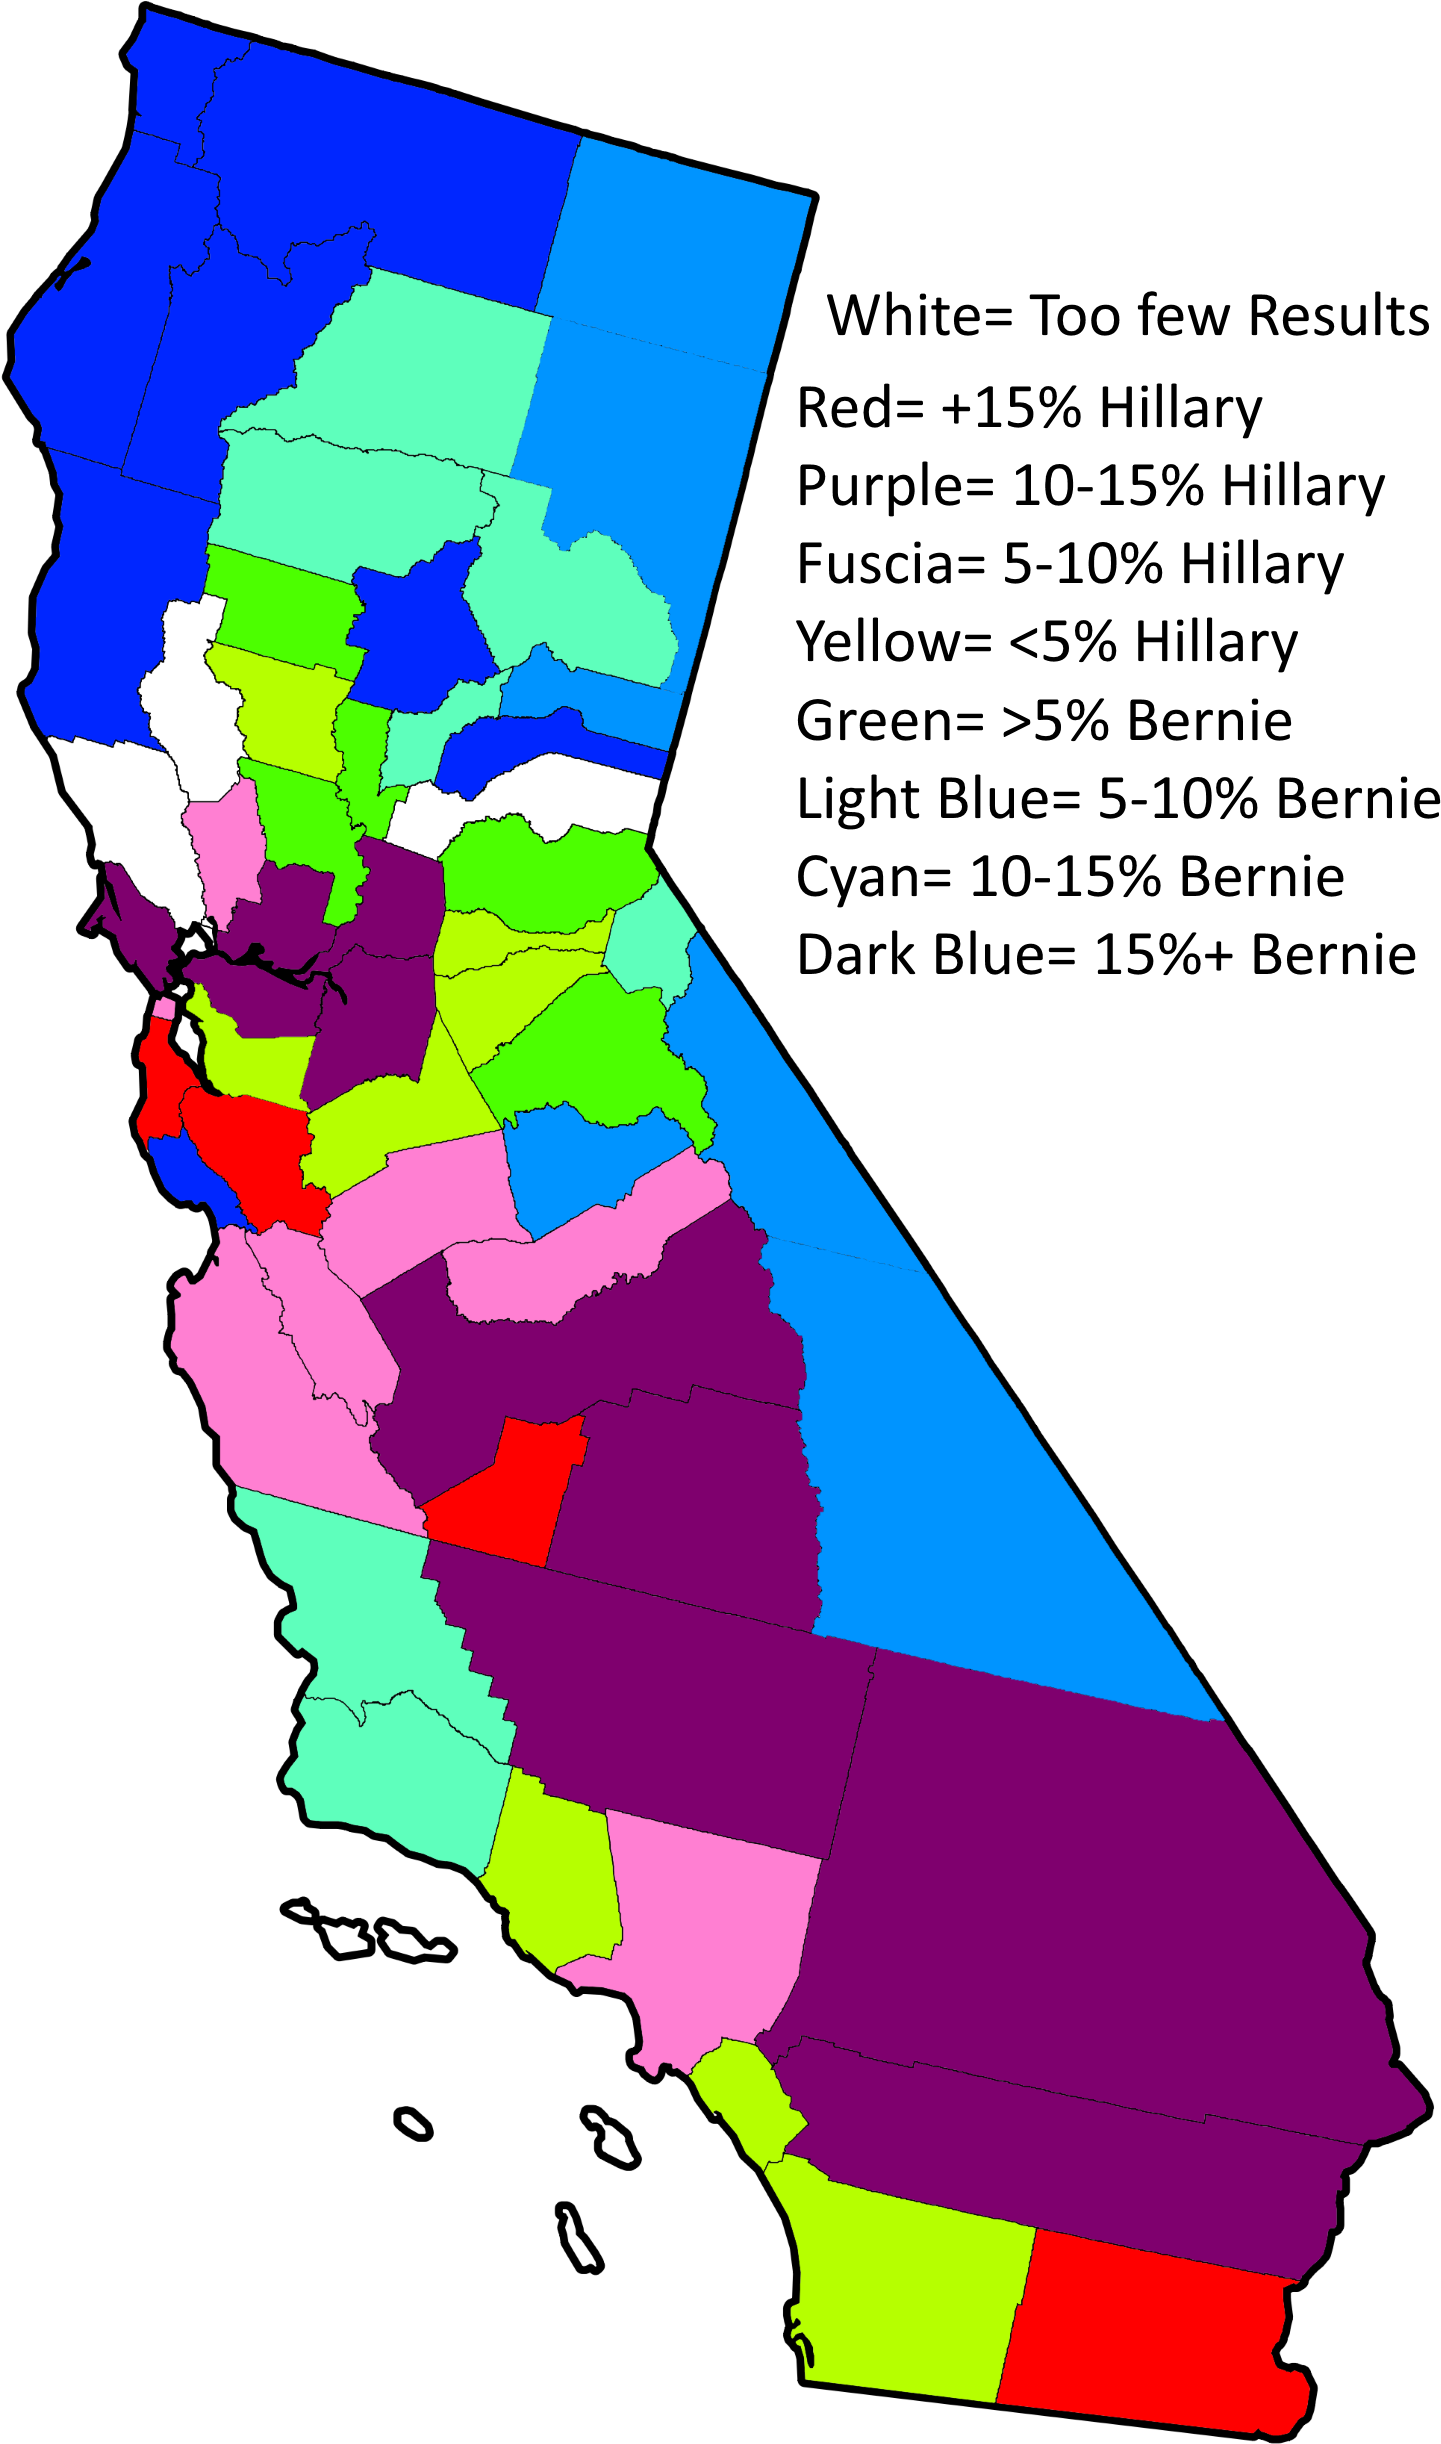 Democratic Grand Finale Tuesday Results Thread - California County Map (1493x2500)